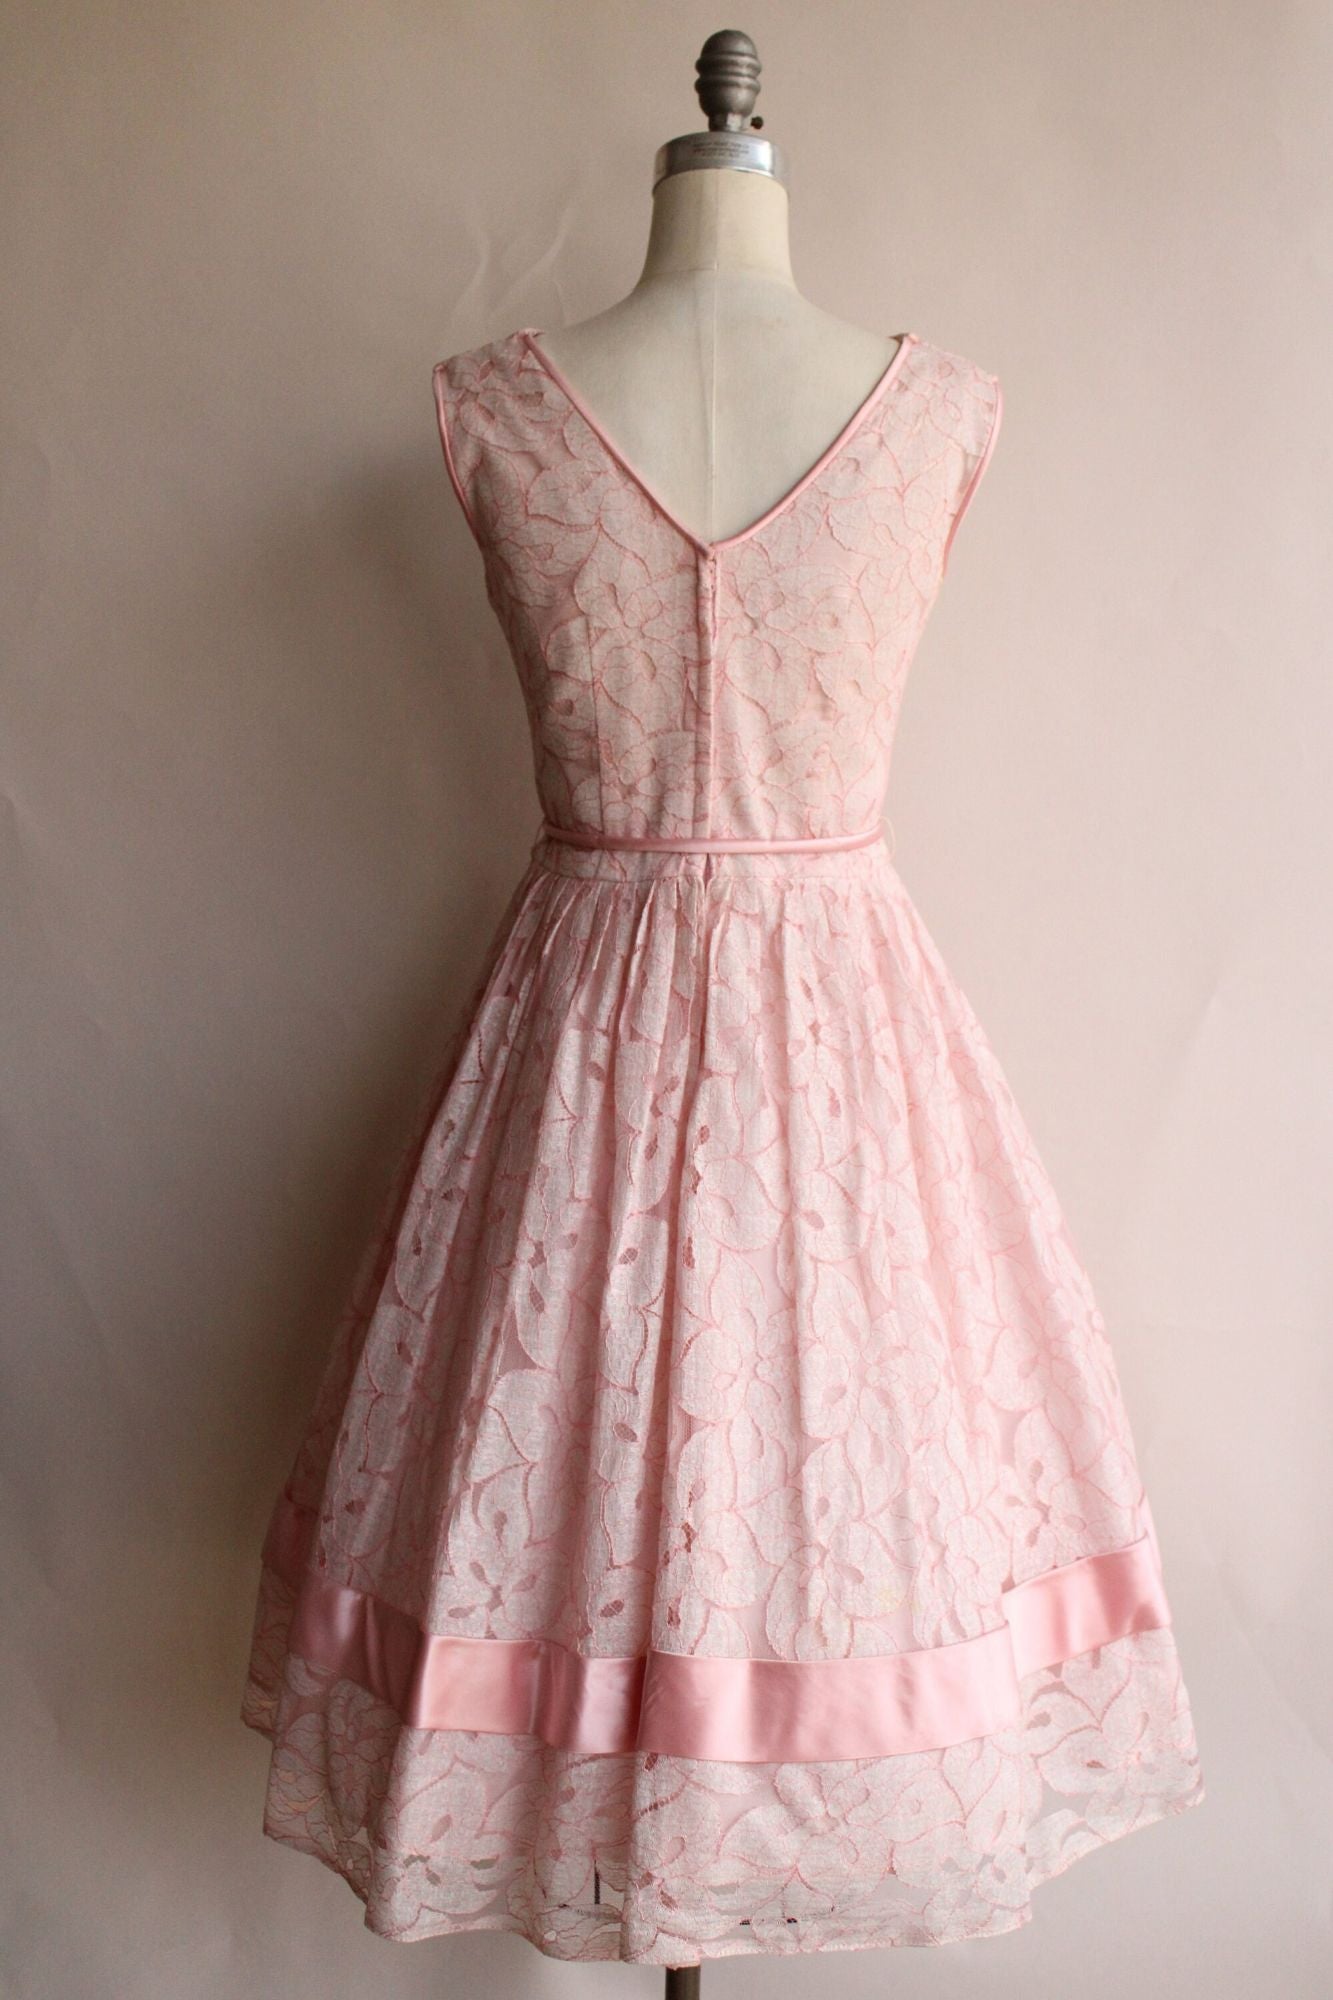 Vintage 1950s 1960s Dress with Belt in Pink Lace